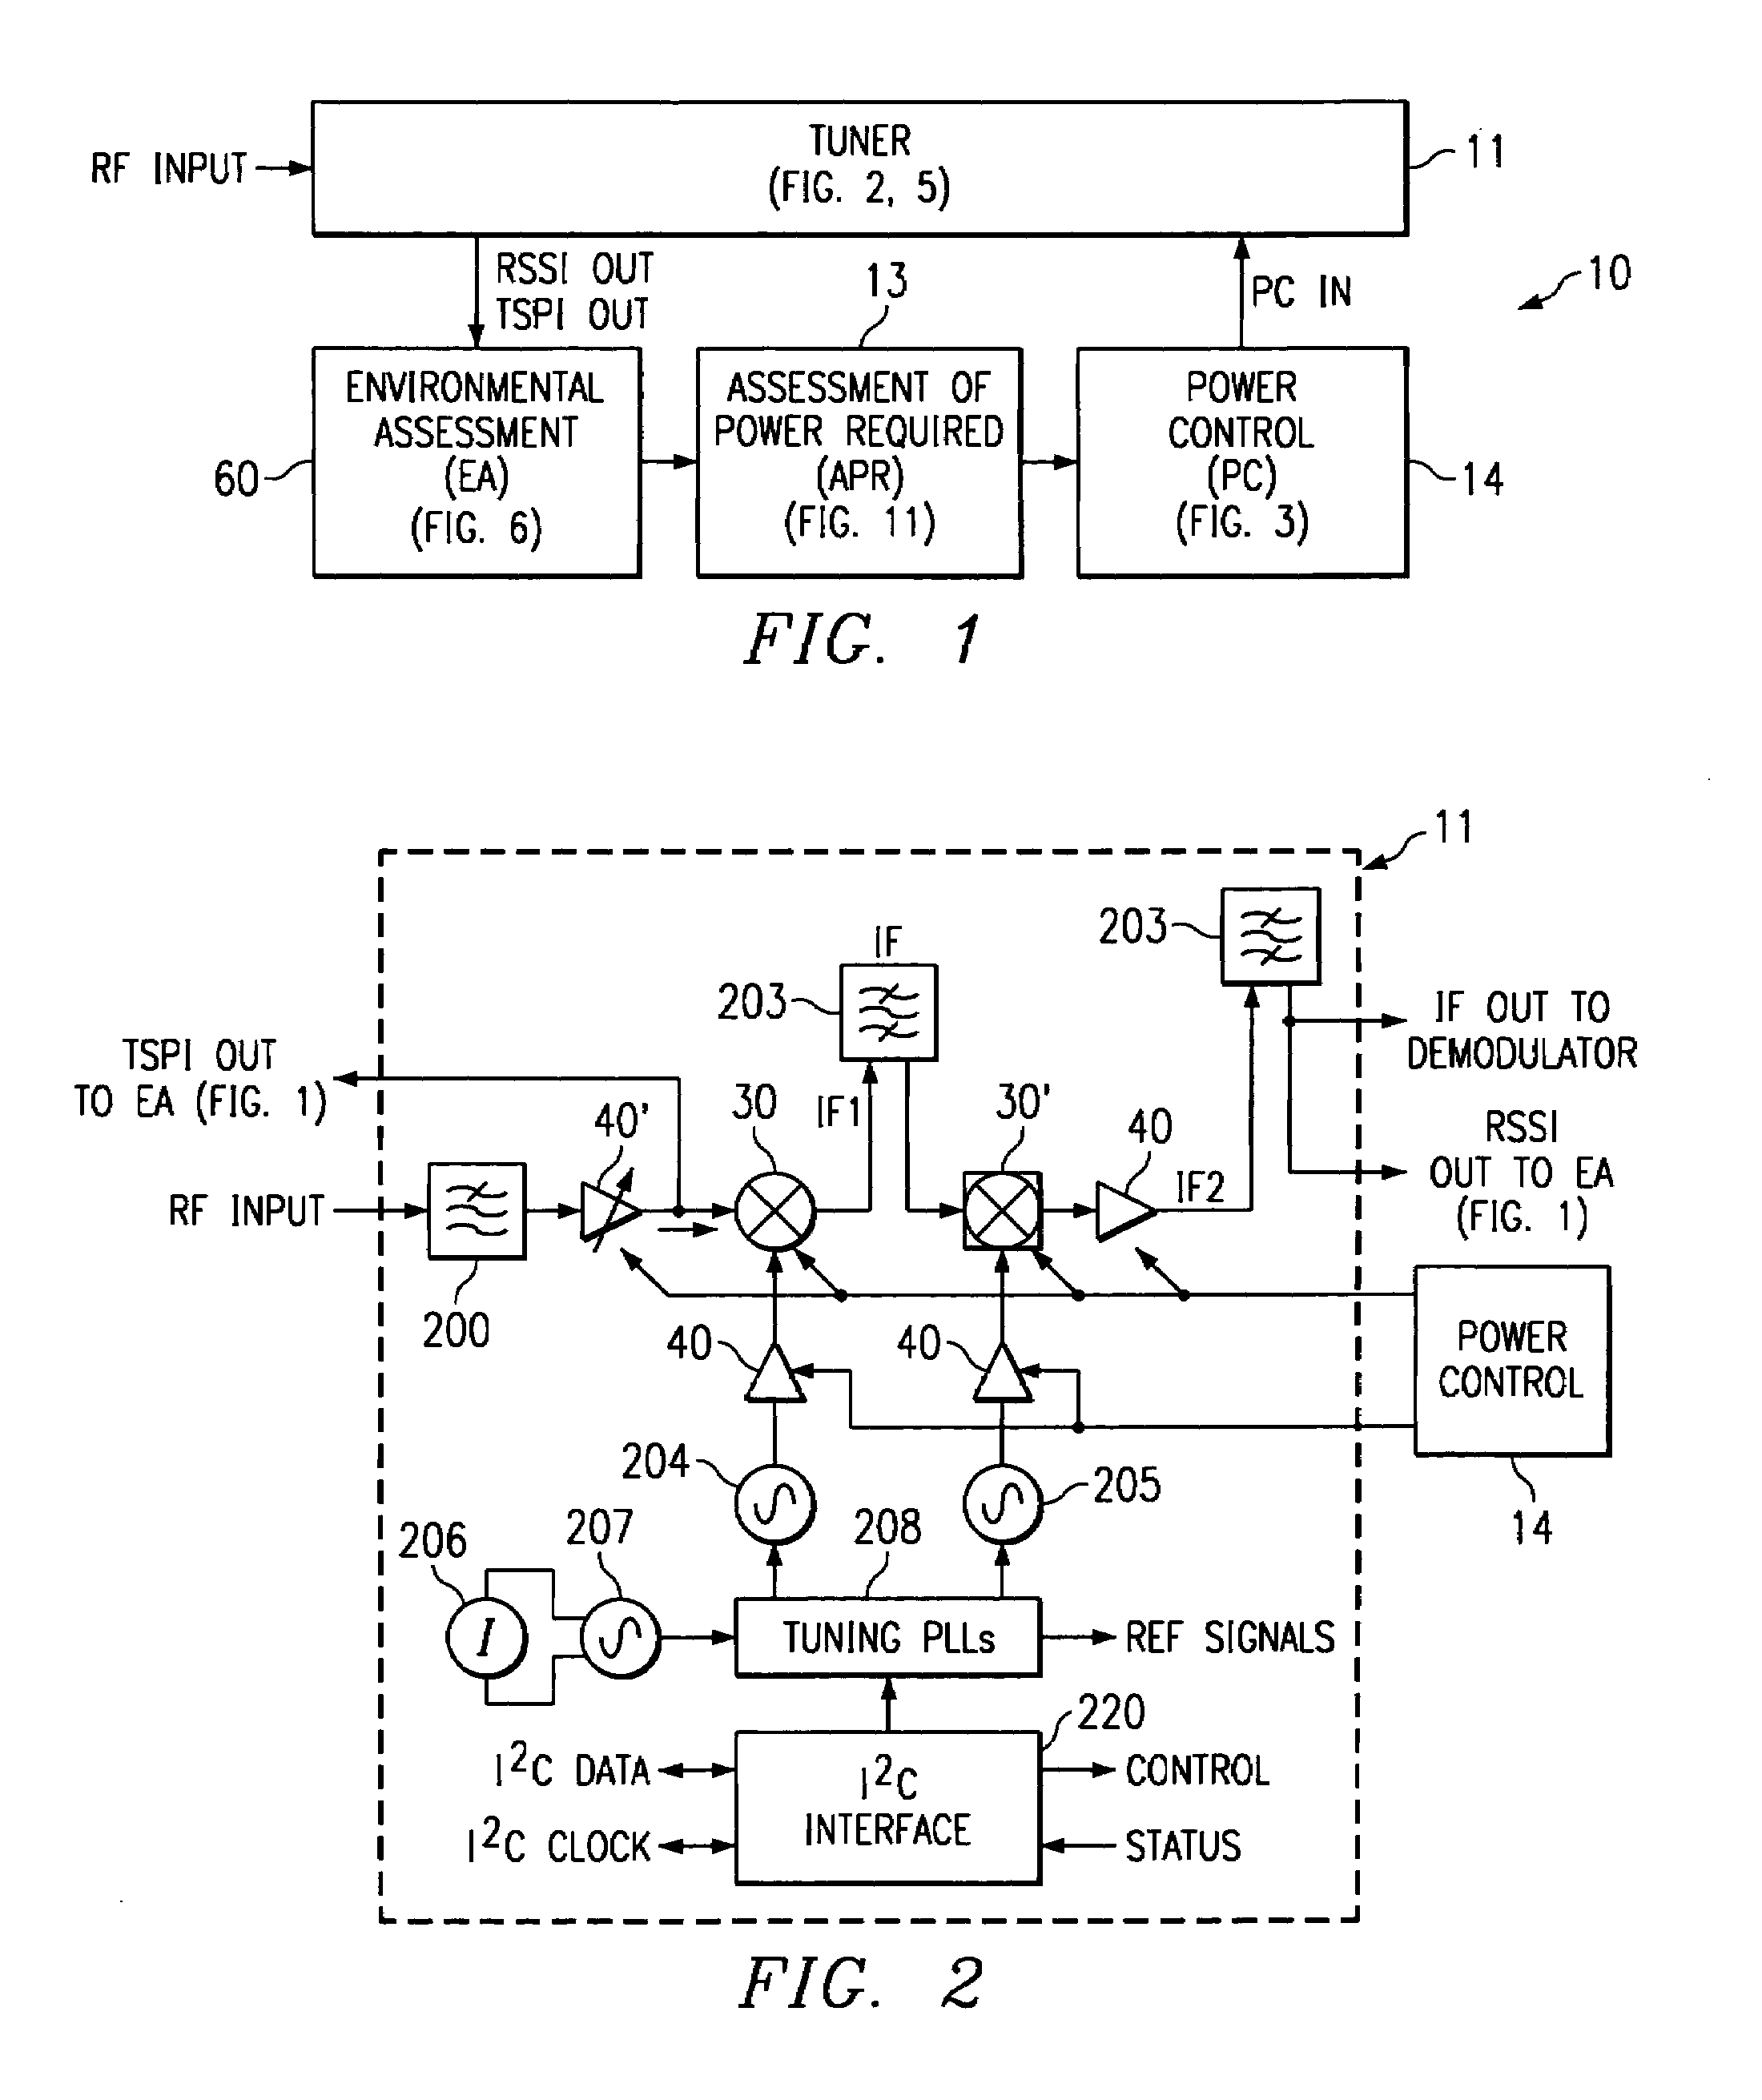 Tuner system self adaptive to signal environment